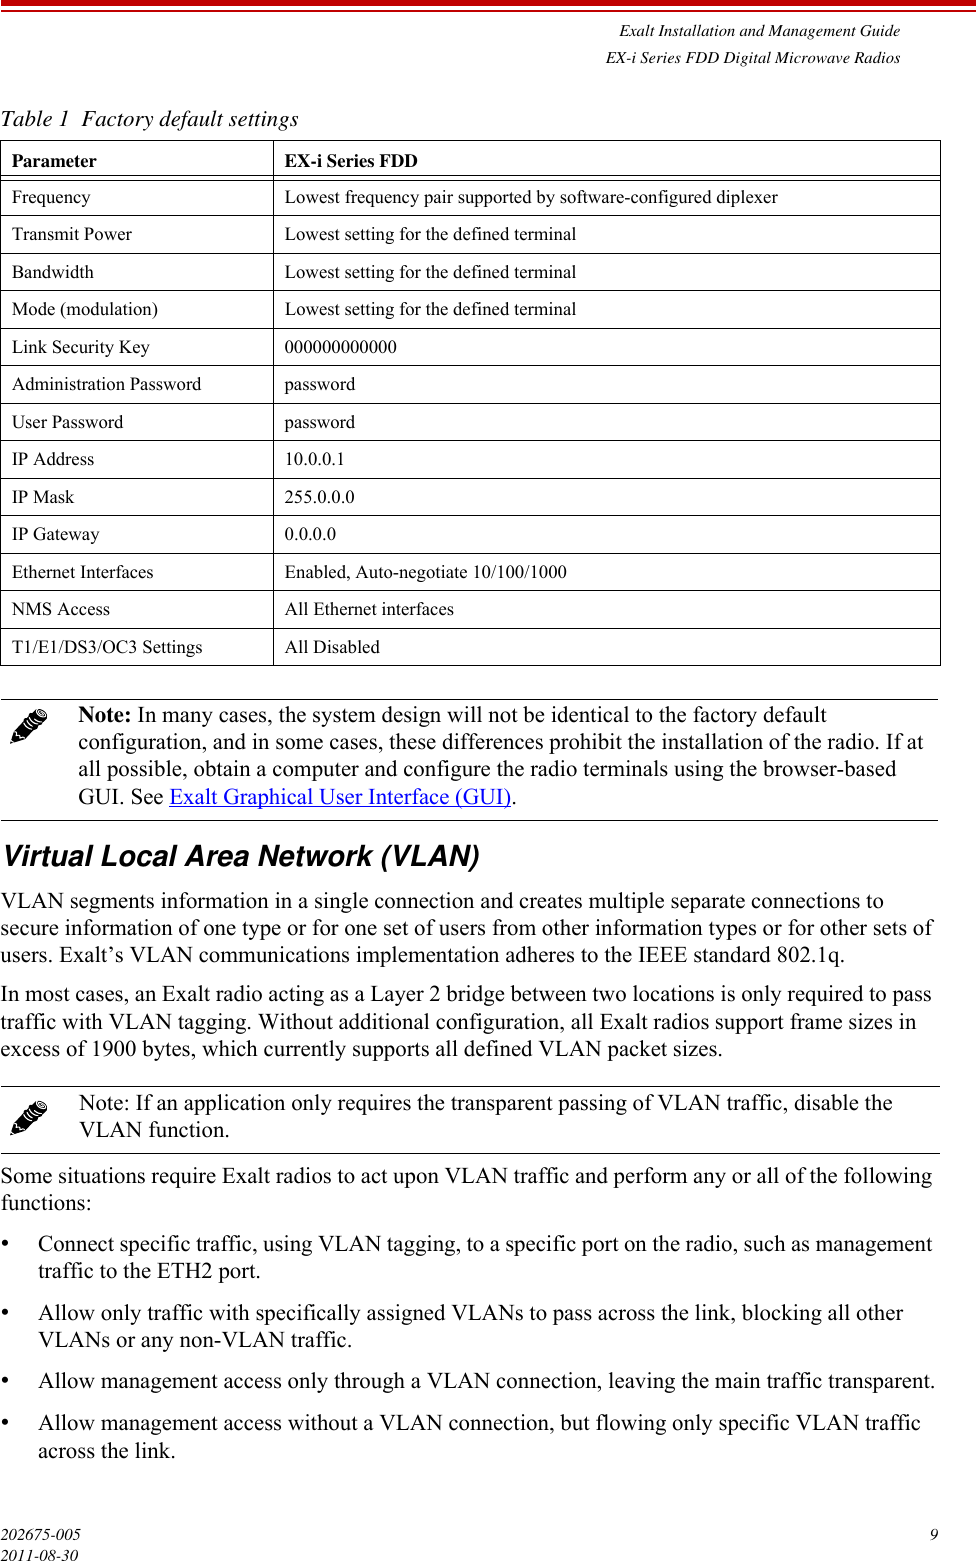 Exalt Installation and Management GuideEX-i Series FDD Digital Microwave Radios202675-005 92011-08-30Virtual Local Area Network (VLAN)VLAN segments information in a single connection and creates multiple separate connections to secure information of one type or for one set of users from other information types or for other sets of users. Exalt’s VLAN communications implementation adheres to the IEEE standard 802.1q.In most cases, an Exalt radio acting as a Layer 2 bridge between two locations is only required to pass traffic with VLAN tagging. Without additional configuration, all Exalt radios support frame sizes in excess of 1900 bytes, which currently supports all defined VLAN packet sizes.Some situations require Exalt radios to act upon VLAN traffic and perform any or all of the following functions:•Connect specific traffic, using VLAN tagging, to a specific port on the radio, such as management traffic to the ETH2 port.•Allow only traffic with specifically assigned VLANs to pass across the link, blocking all other VLANs or any non-VLAN traffic.•Allow management access only through a VLAN connection, leaving the main traffic transparent.•Allow management access without a VLAN connection, but flowing only specific VLAN traffic across the link.Table 1  Factory default settingsParameter EX-i Series FDDFrequency Lowest frequency pair supported by software-configured diplexerTransmit Power Lowest setting for the defined terminalBandwidth Lowest setting for the defined terminalMode (modulation) Lowest setting for the defined terminalLink Security Key 000000000000Administration Password passwordUser Password passwordIP Address 10.0.0.1 IP Mask 255.0.0.0IP Gateway 0.0.0.0Ethernet Interfaces Enabled, Auto-negotiate 10/100/1000NMS Access All Ethernet interfacesT1/E1/DS3/OC3 Settings All DisabledNote: In many cases, the system design will not be identical to the factory default configuration, and in some cases, these differences prohibit the installation of the radio. If at all possible, obtain a computer and configure the radio terminals using the browser-based GUI. See Exalt Graphical User Interface (GUI).Note: If an application only requires the transparent passing of VLAN traffic, disable the VLAN function.